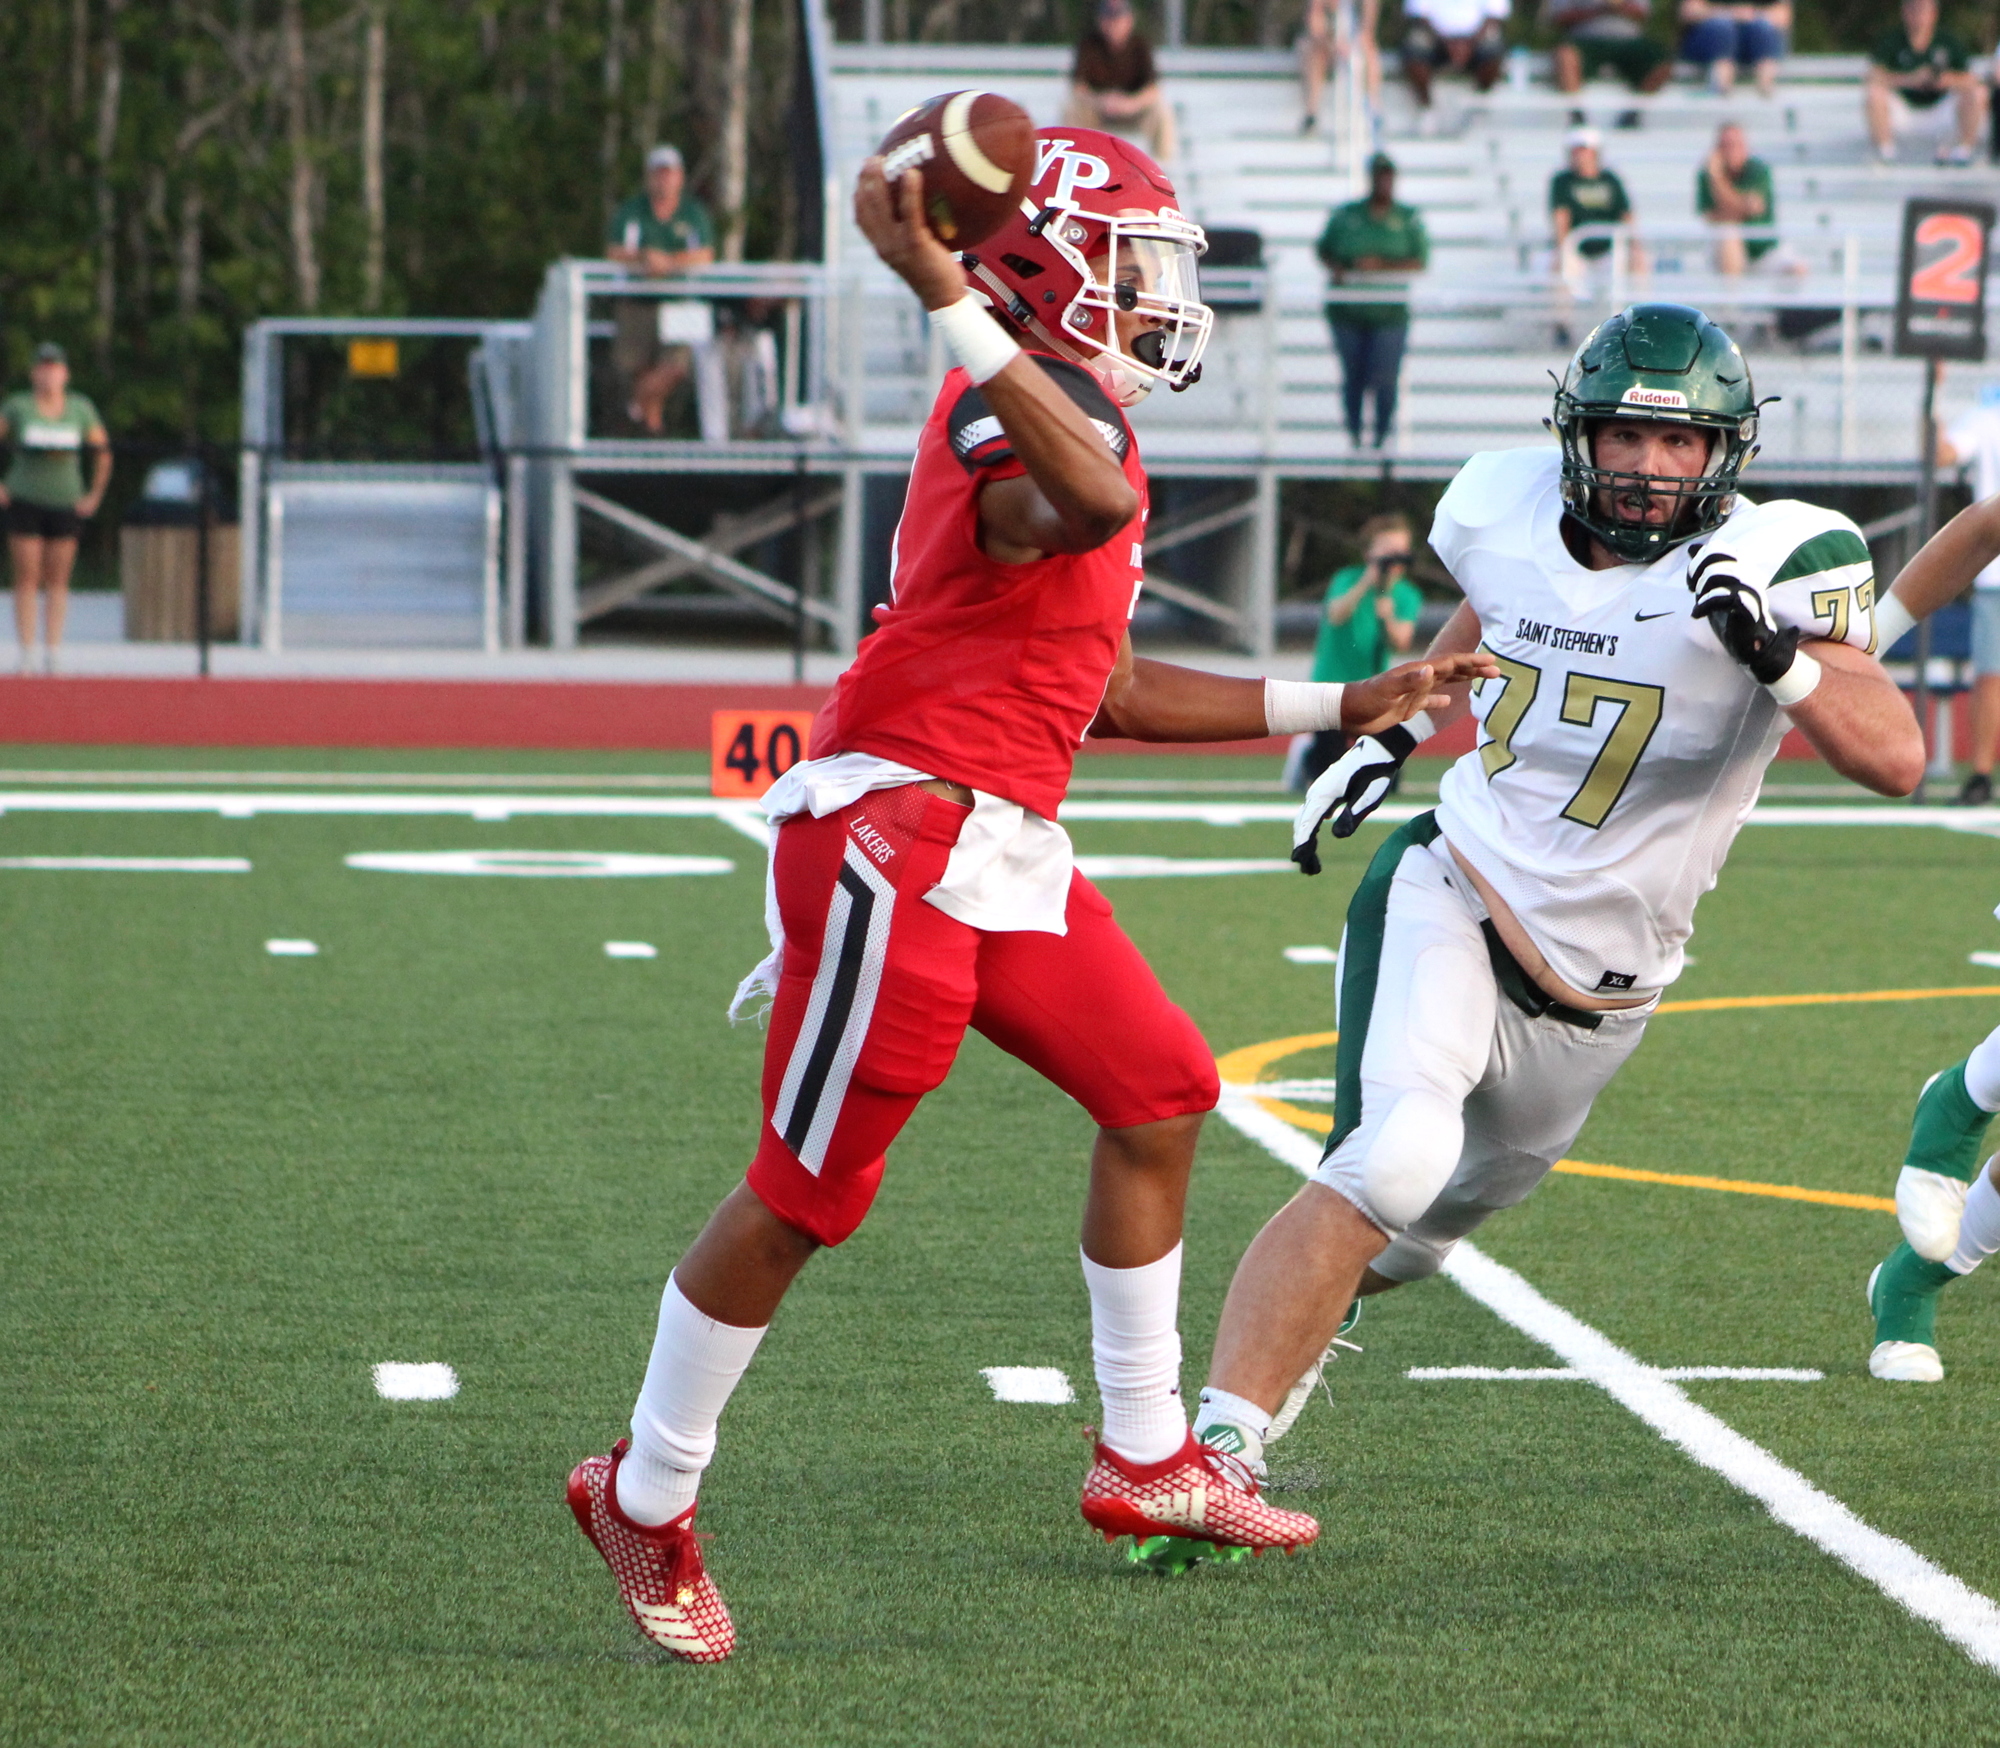 Windermere Prep quarterback Kai Patterson tossed two touchdowns and ran for another. Photo by Chris Mayer